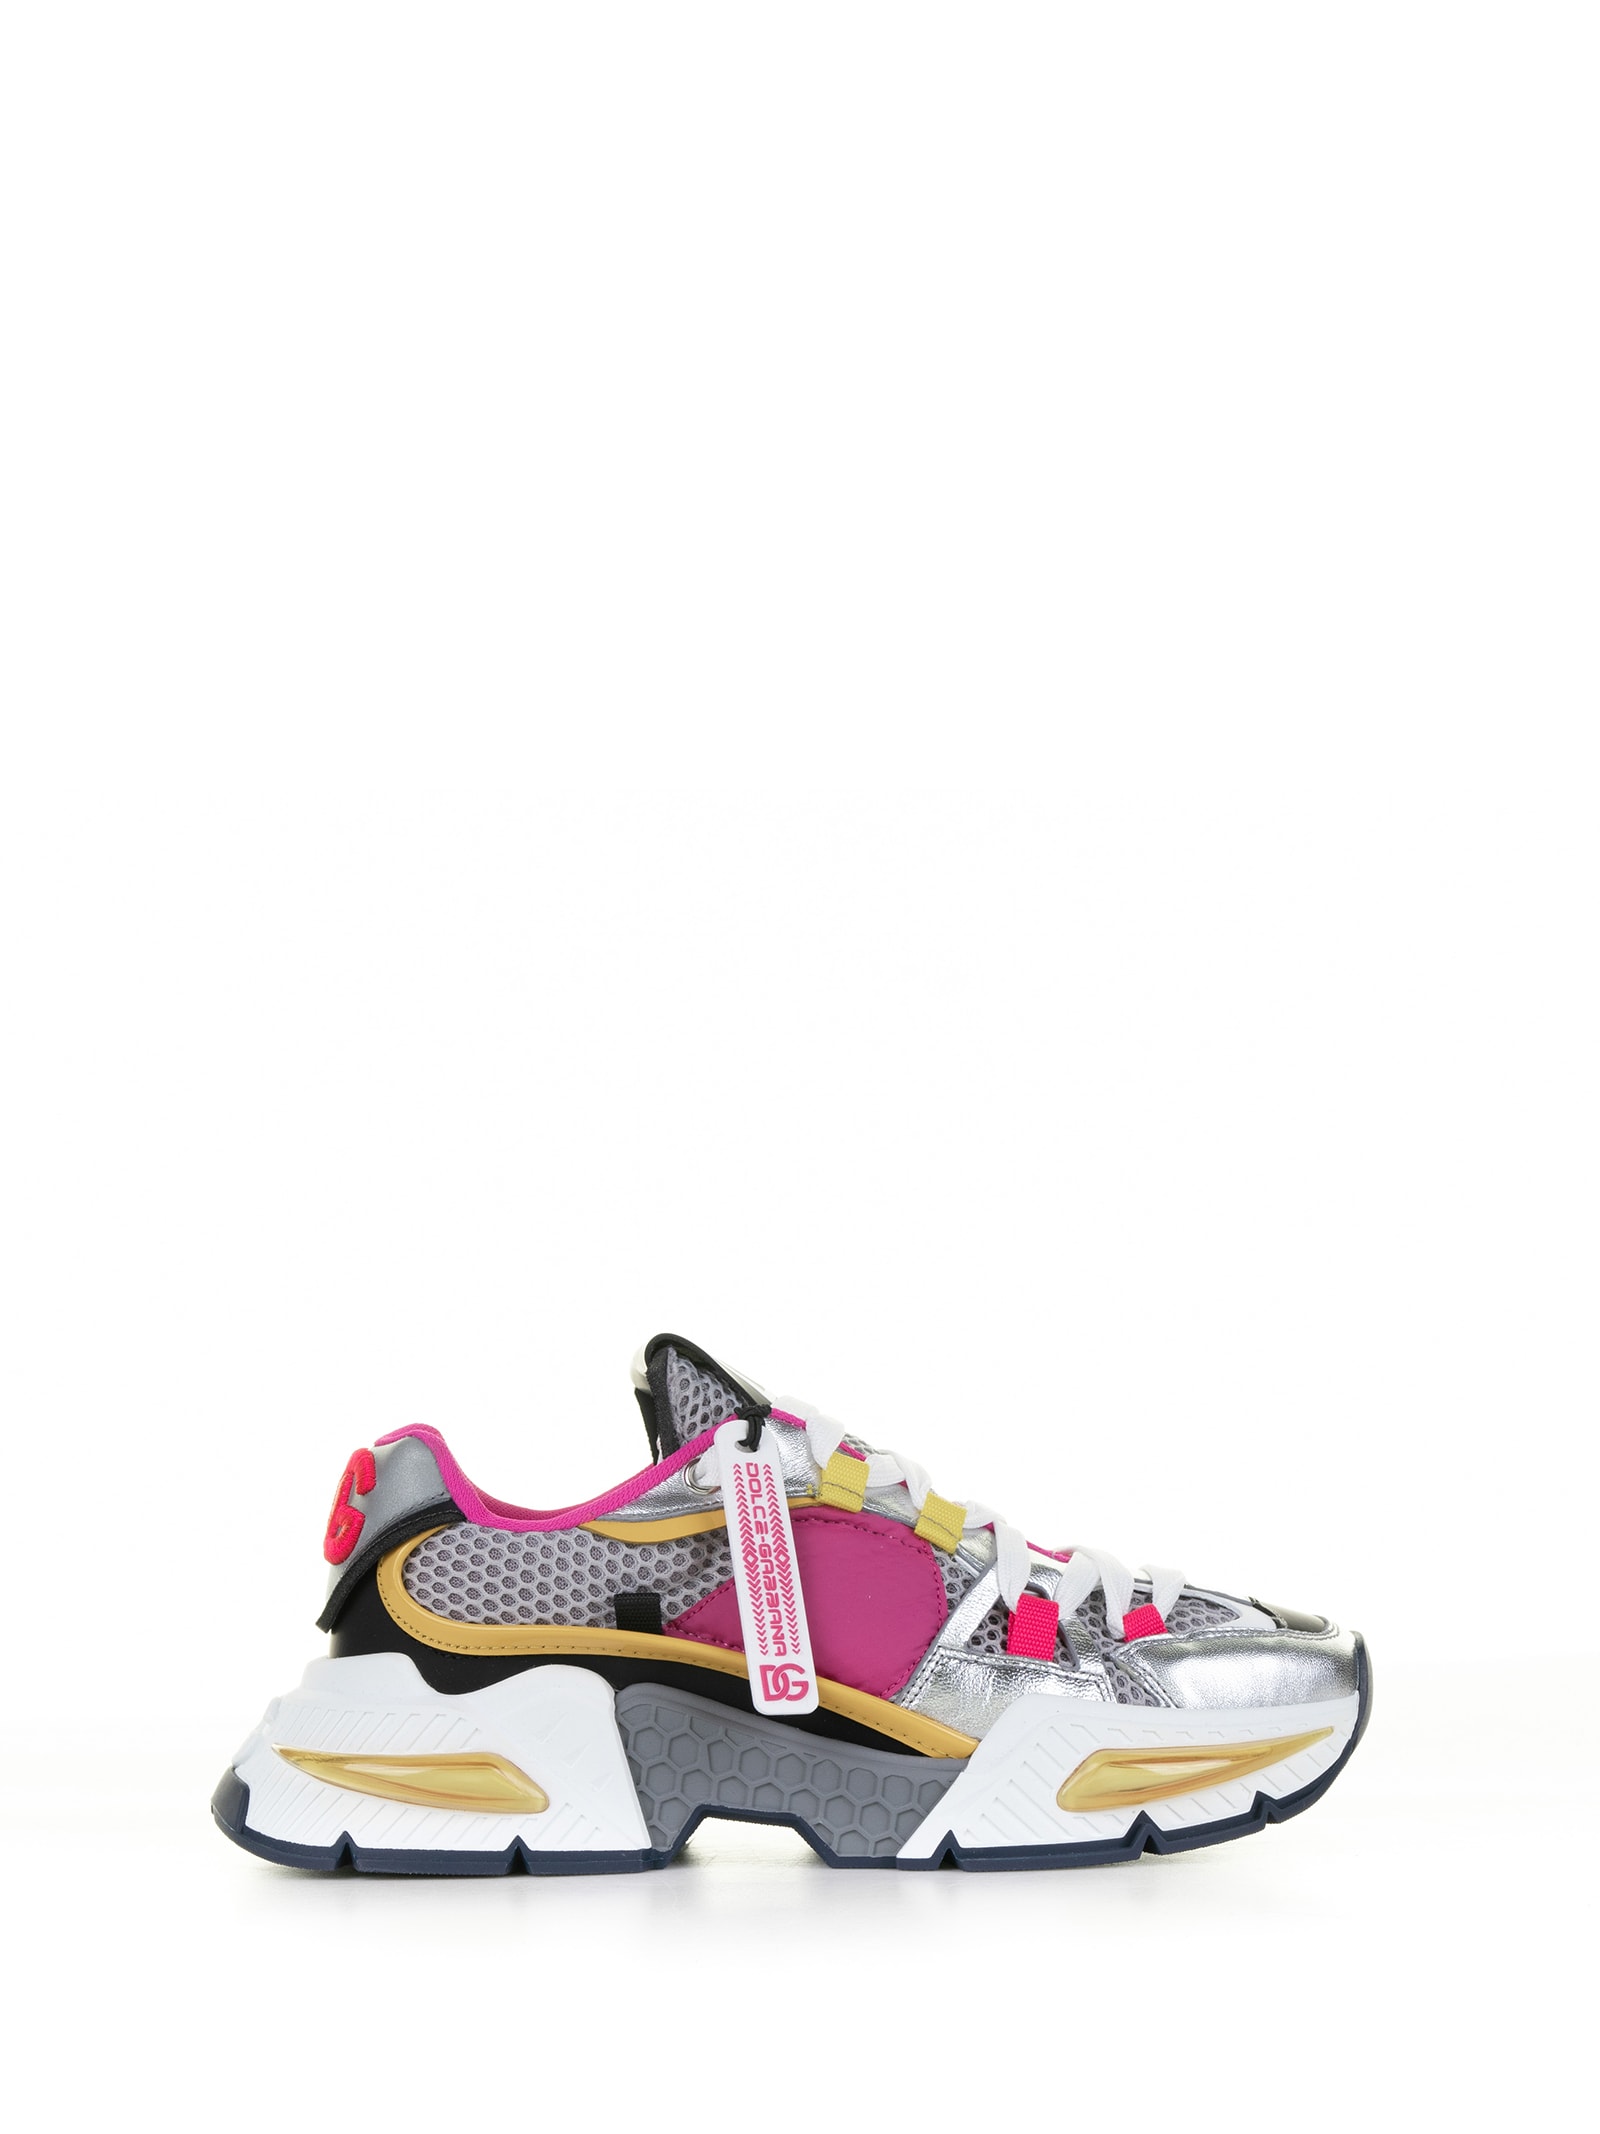 Dolce & Gabbana Daymaster Trainer In Multicolored Leather